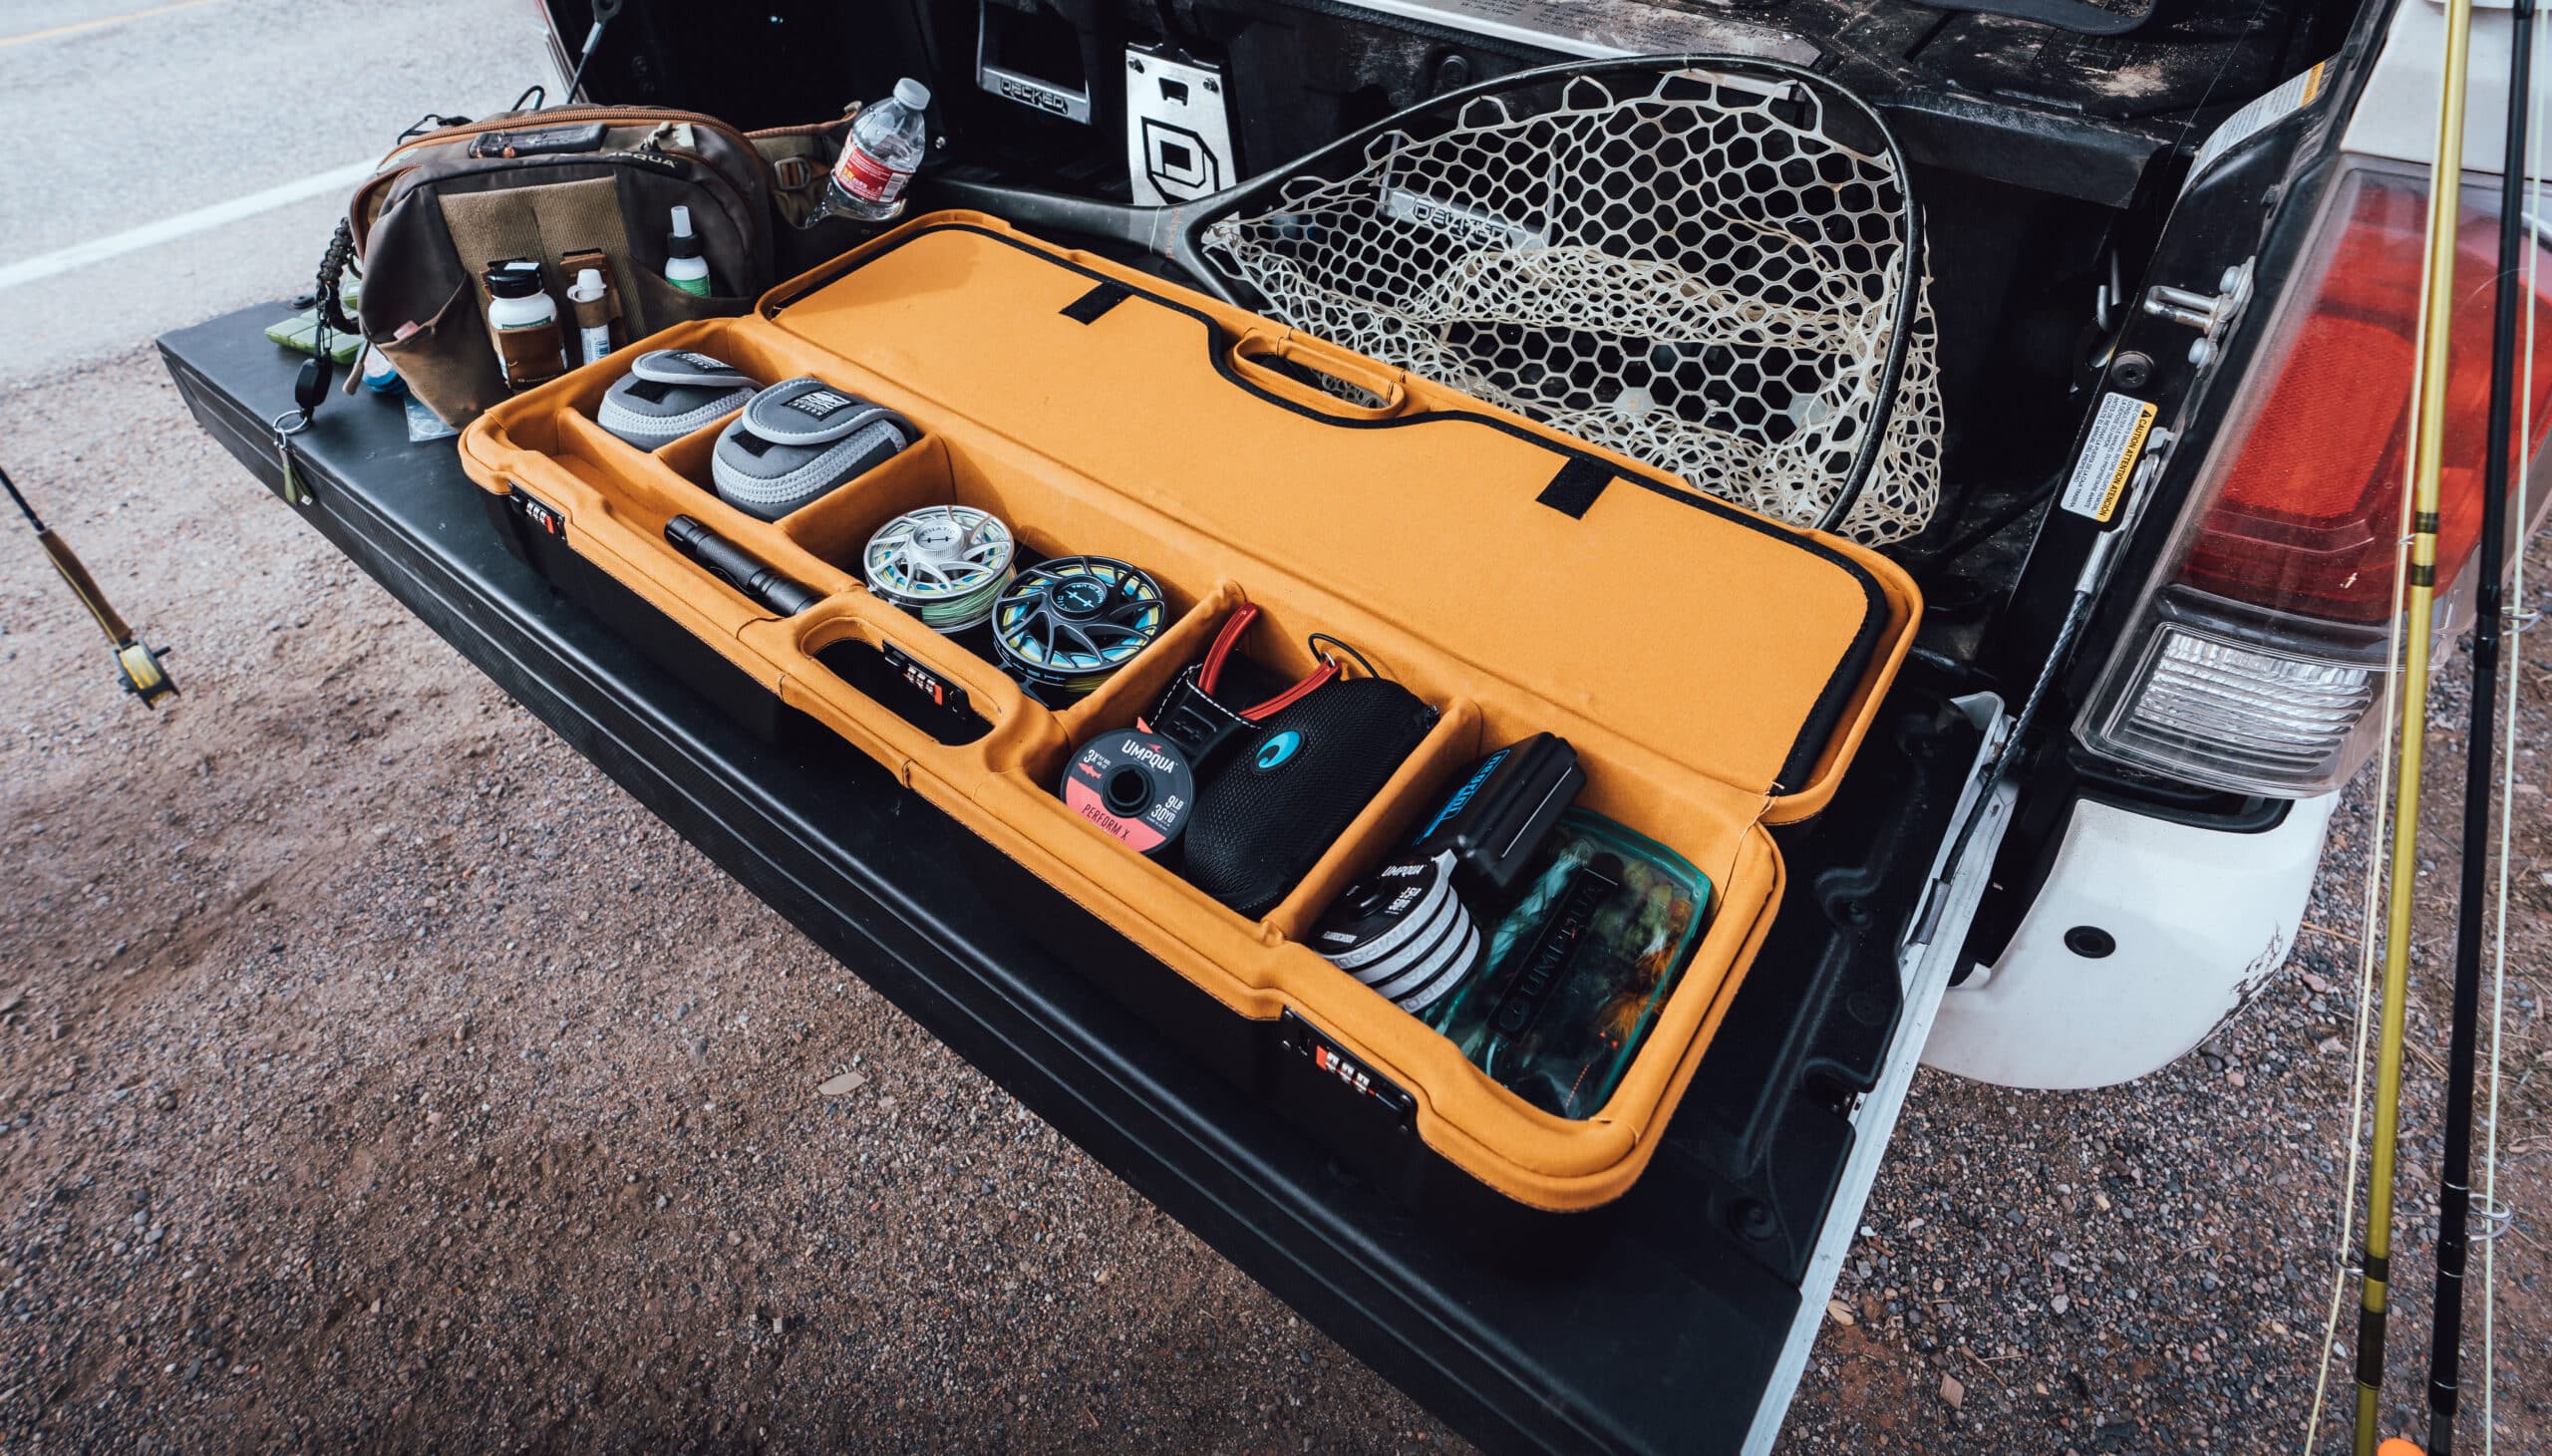 Sea Run Fly Rod and Reel Case loaded up on truck tailgate